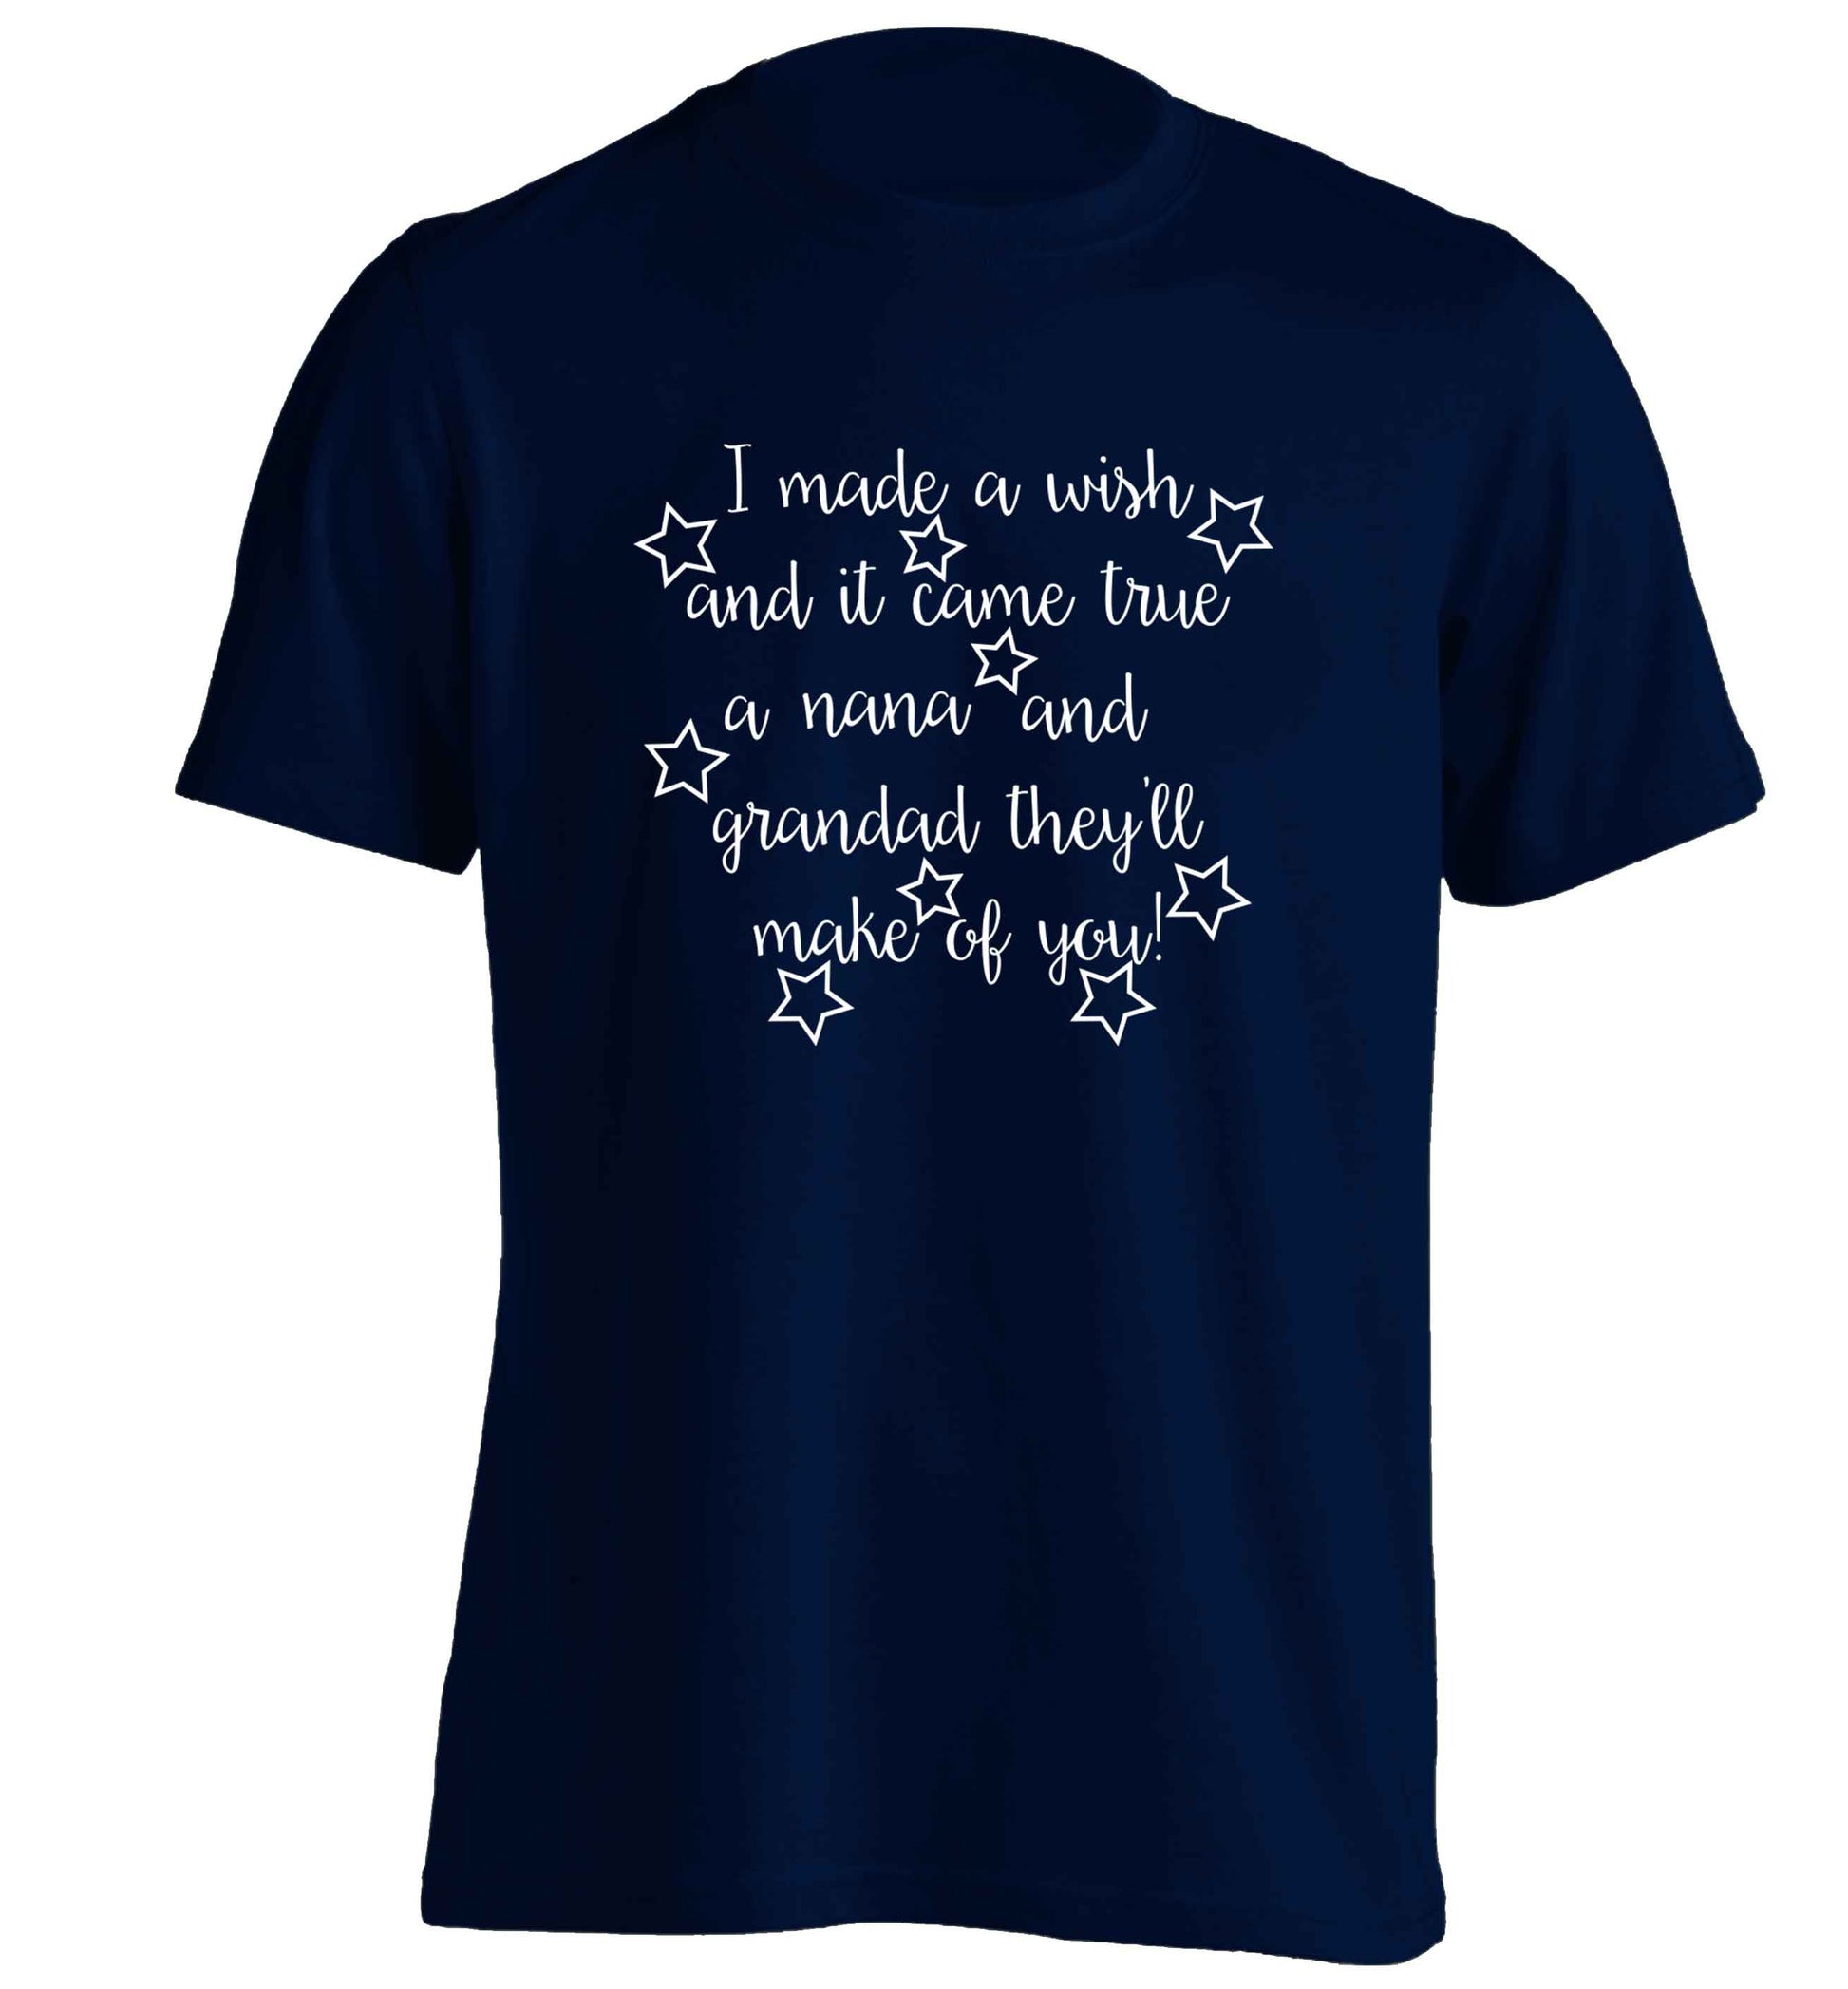 I made a wish and it came true a nana and grandad they'll make of you! adults unisex navy Tshirt 2XL